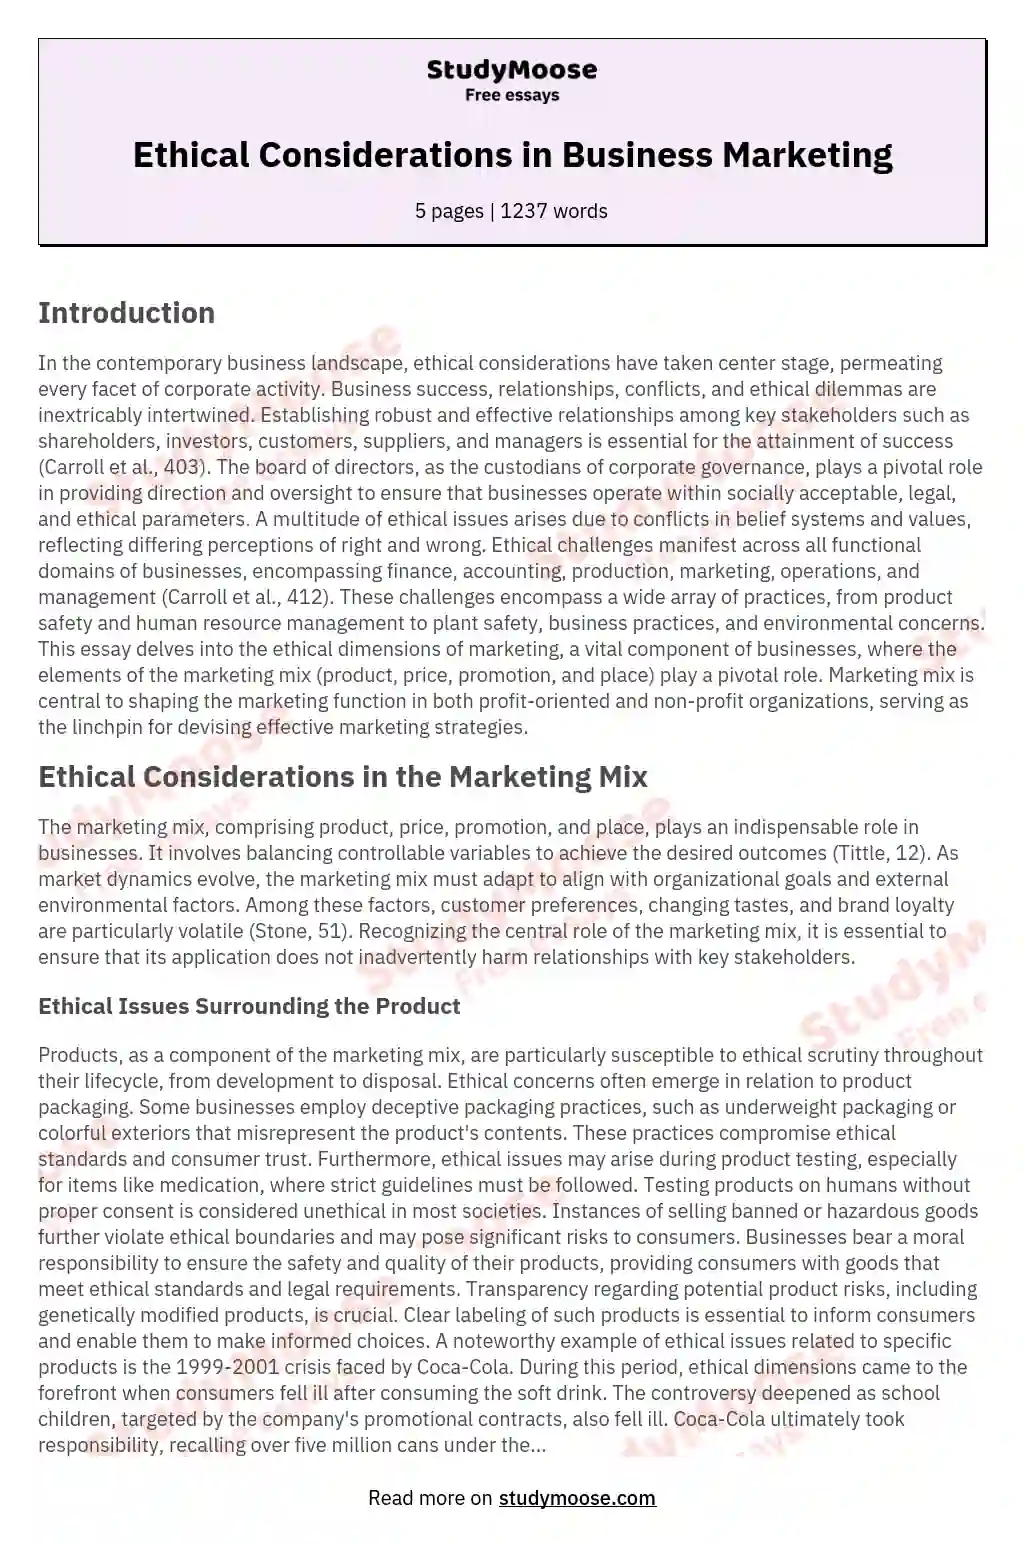 Ethical Considerations in Business Marketing essay